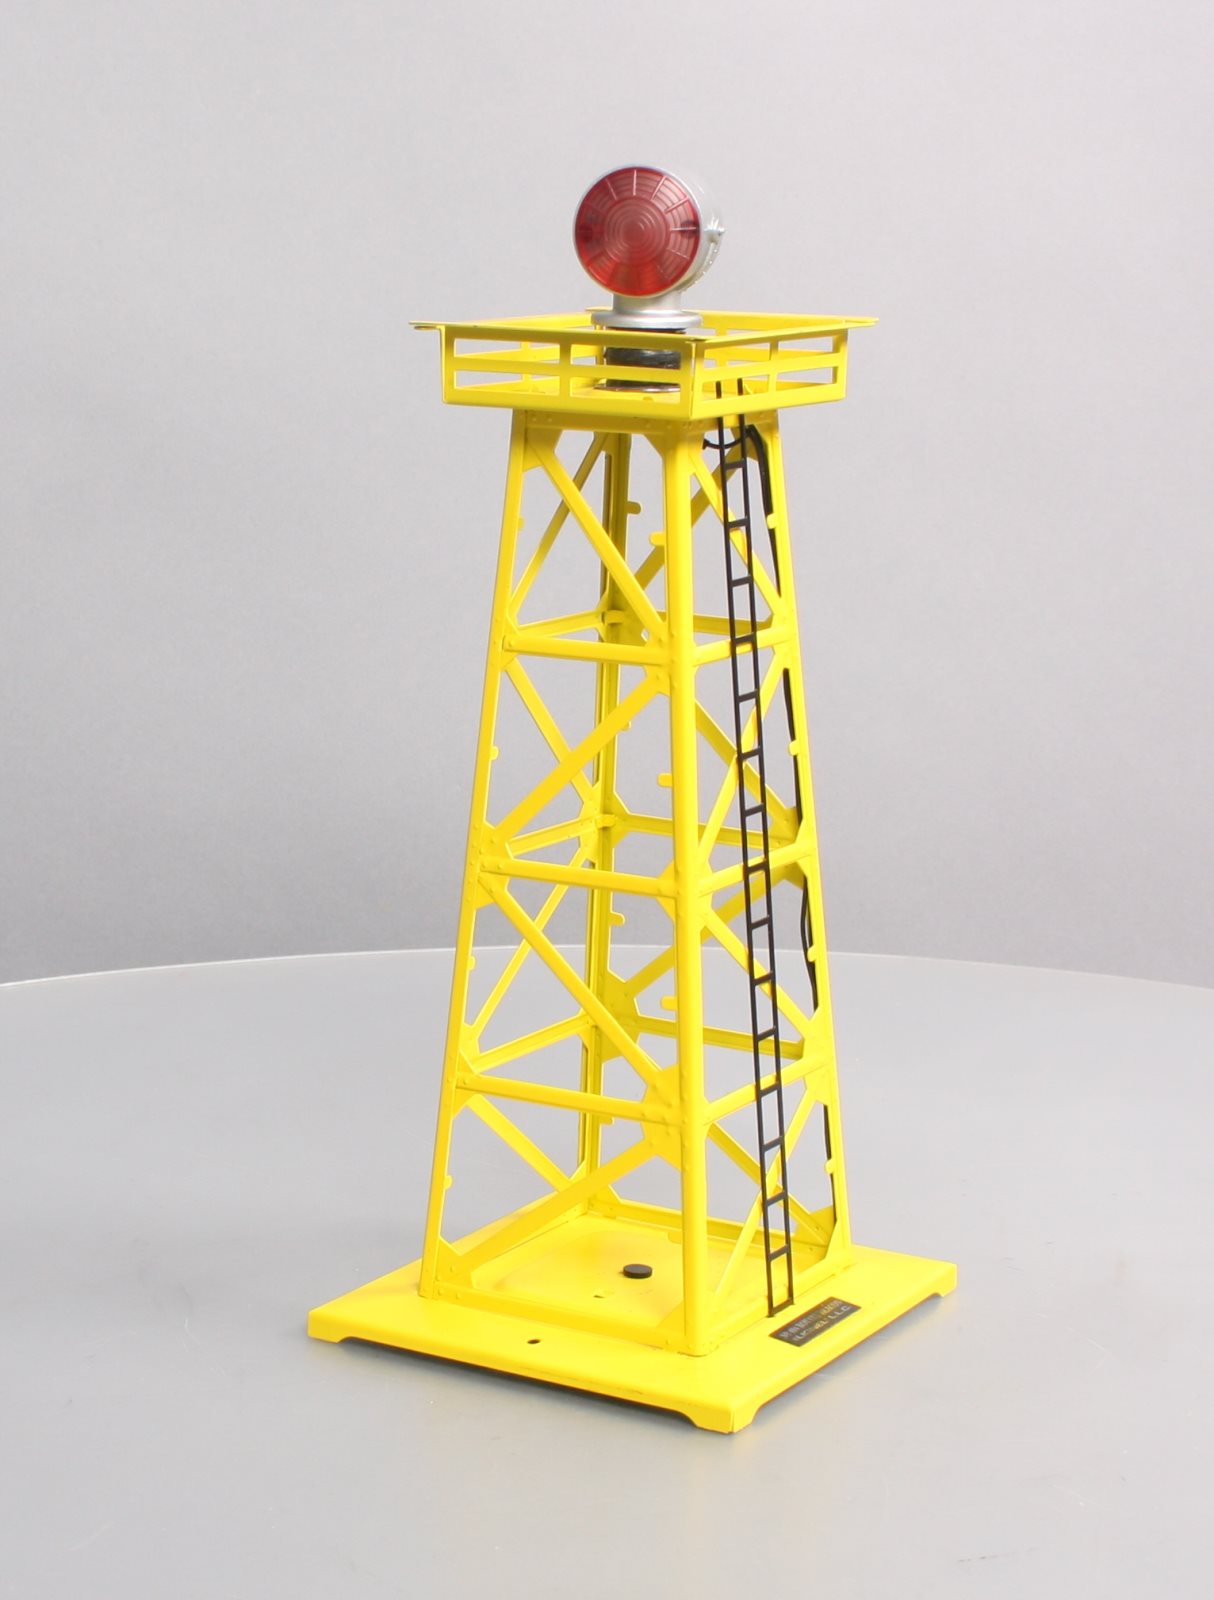 Lionel 6-81944 Yellow #494 Rotary Airport Beacon Tower